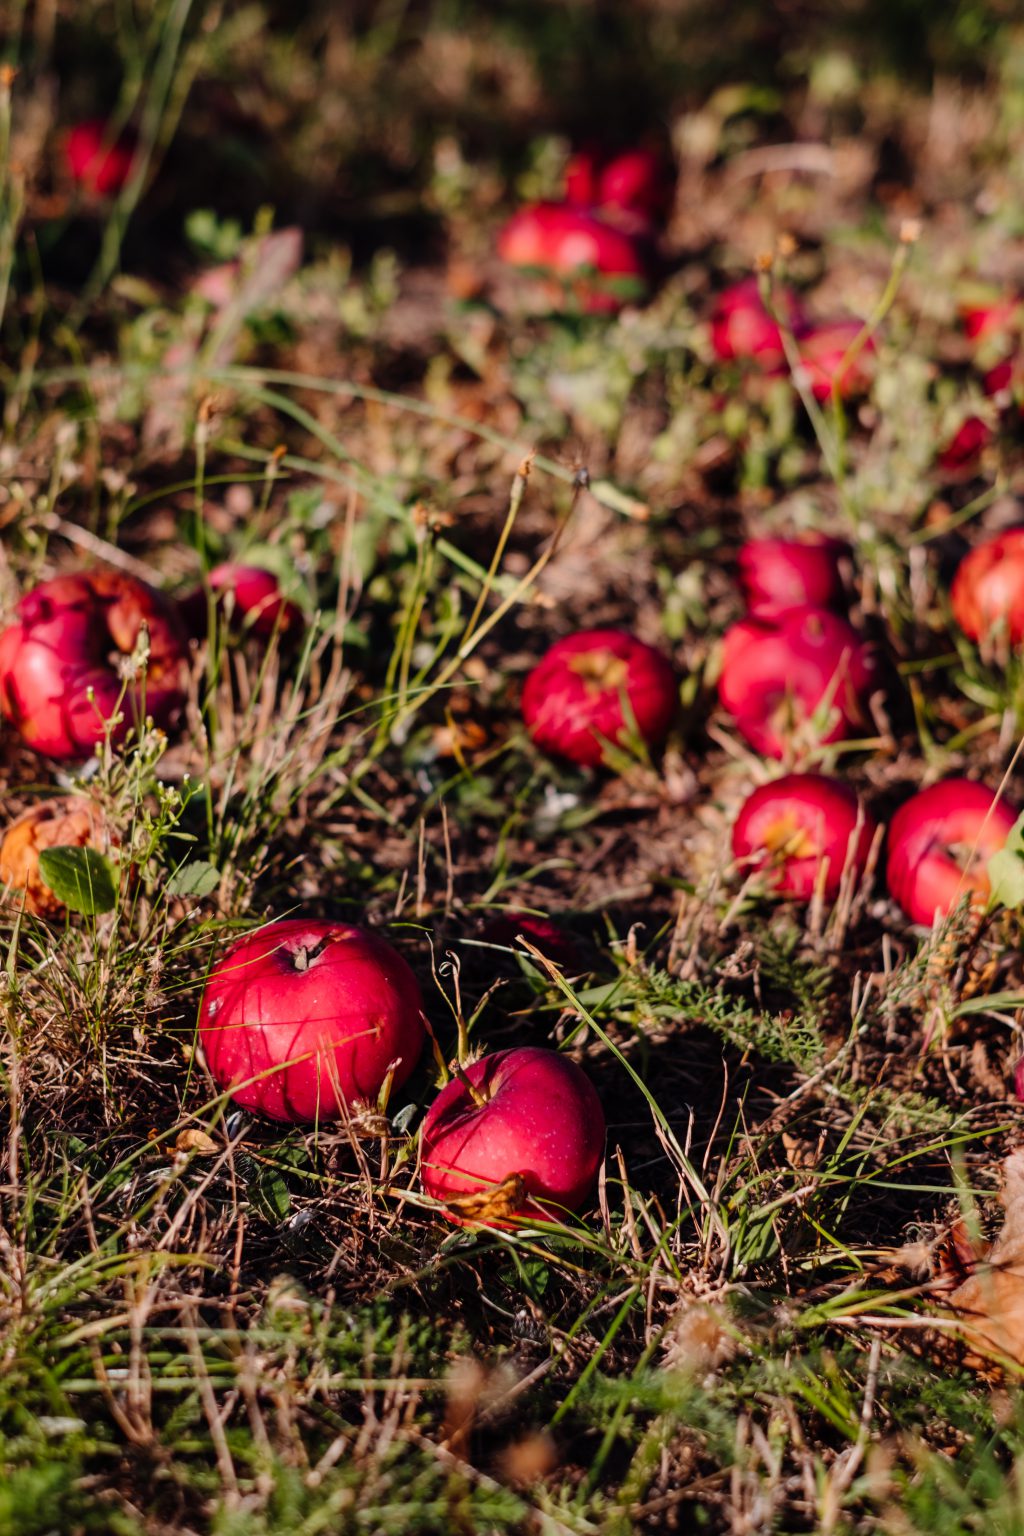 Red apples on the ground - free stock photo